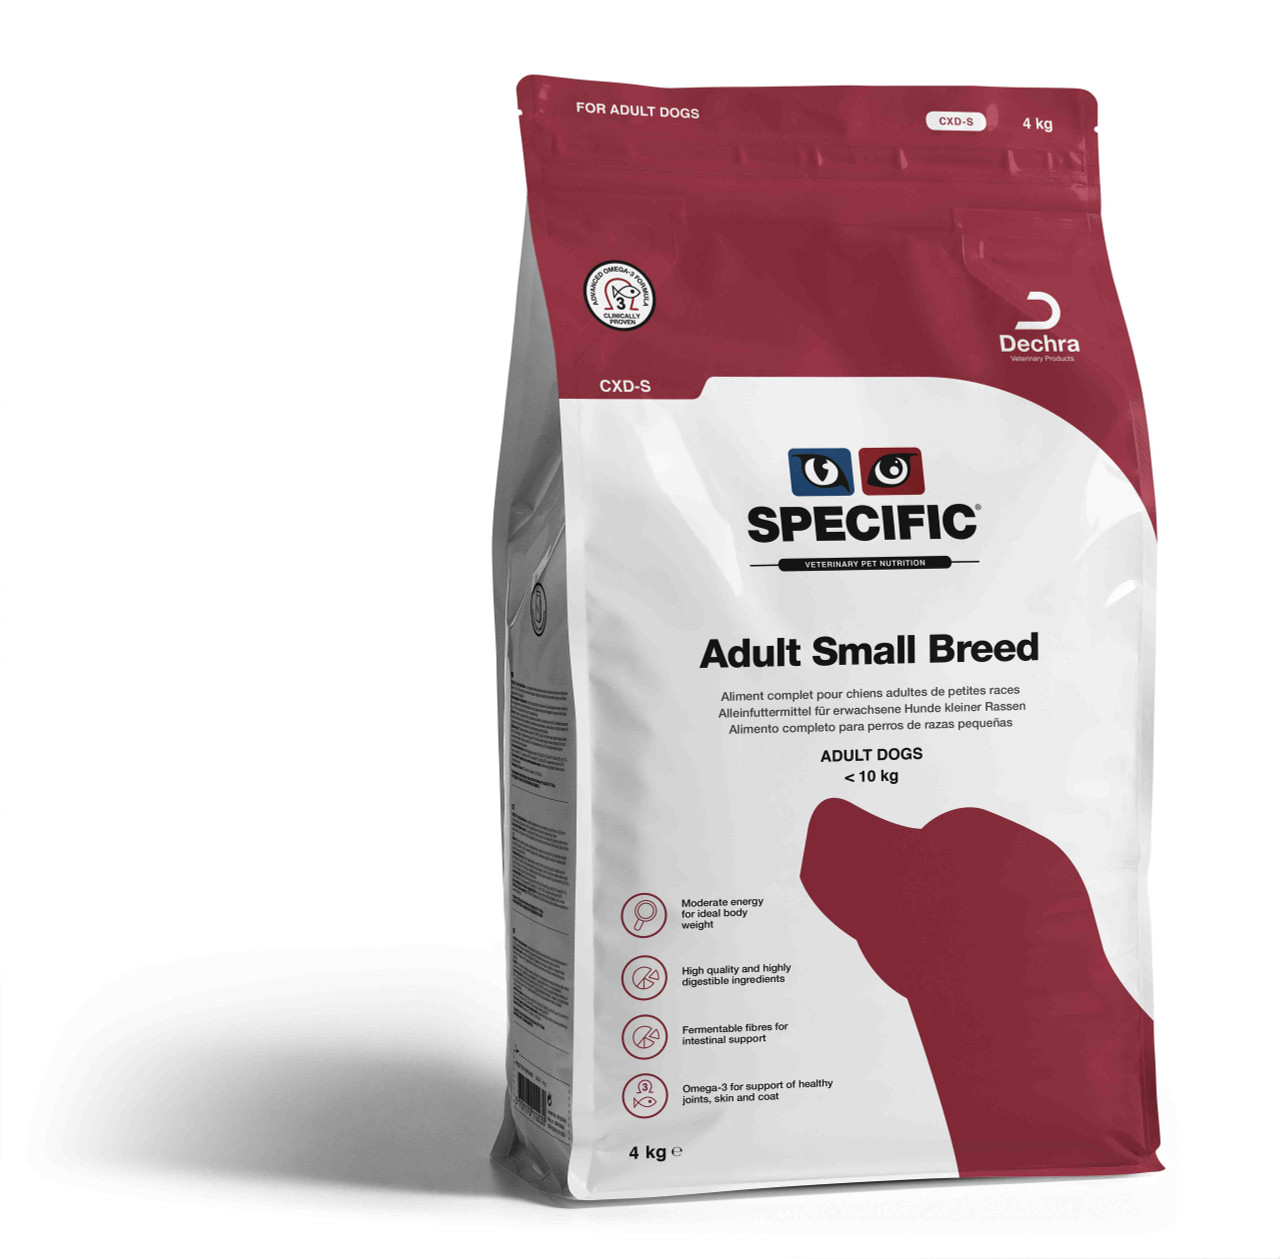 Adult Small Breed CXD-S hundfoder - 4 kg